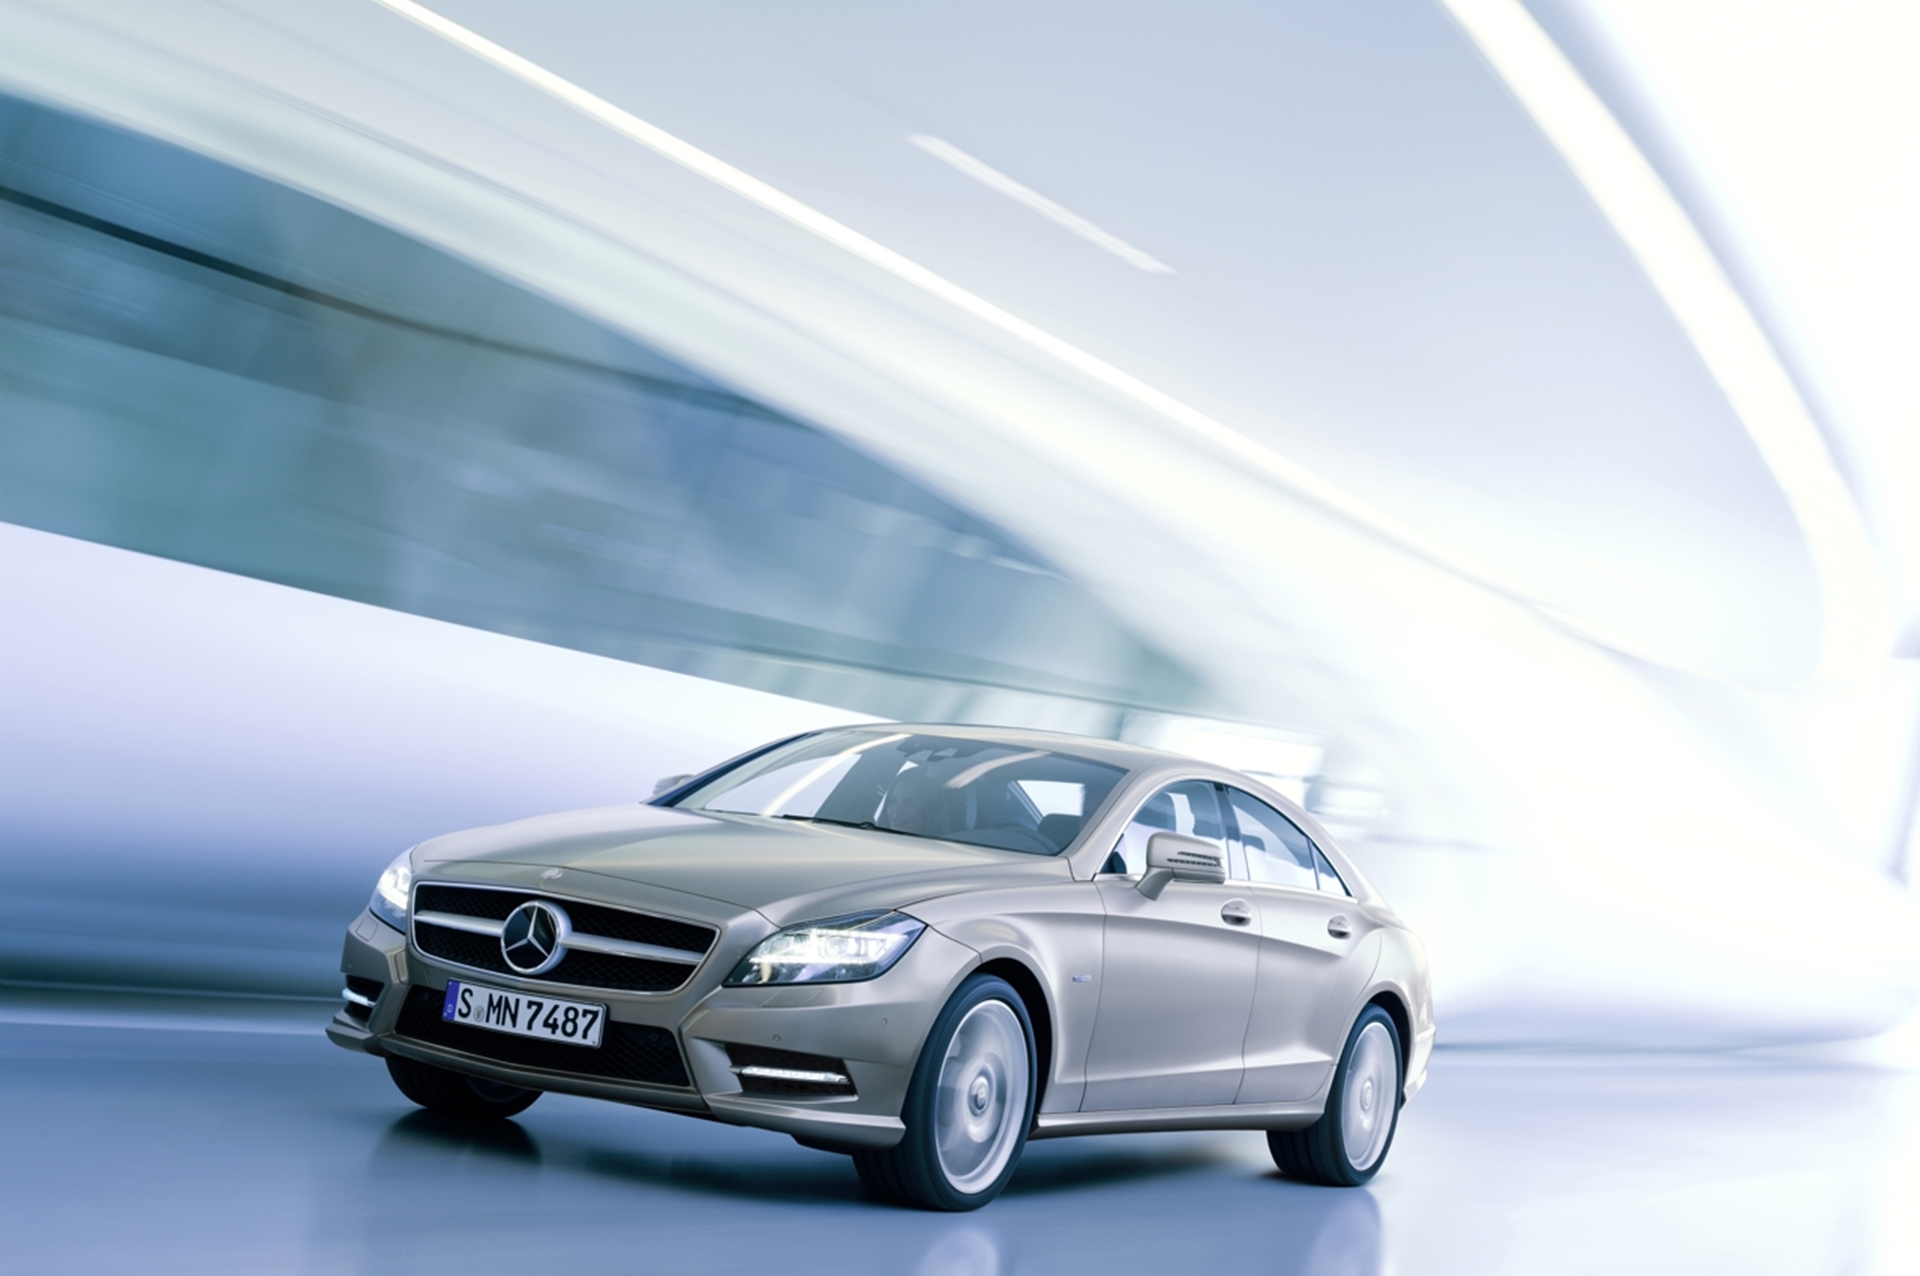 Mercedes-Benz CLS: New four-cylinder diesel engine gives the ultimate in driving efficiency